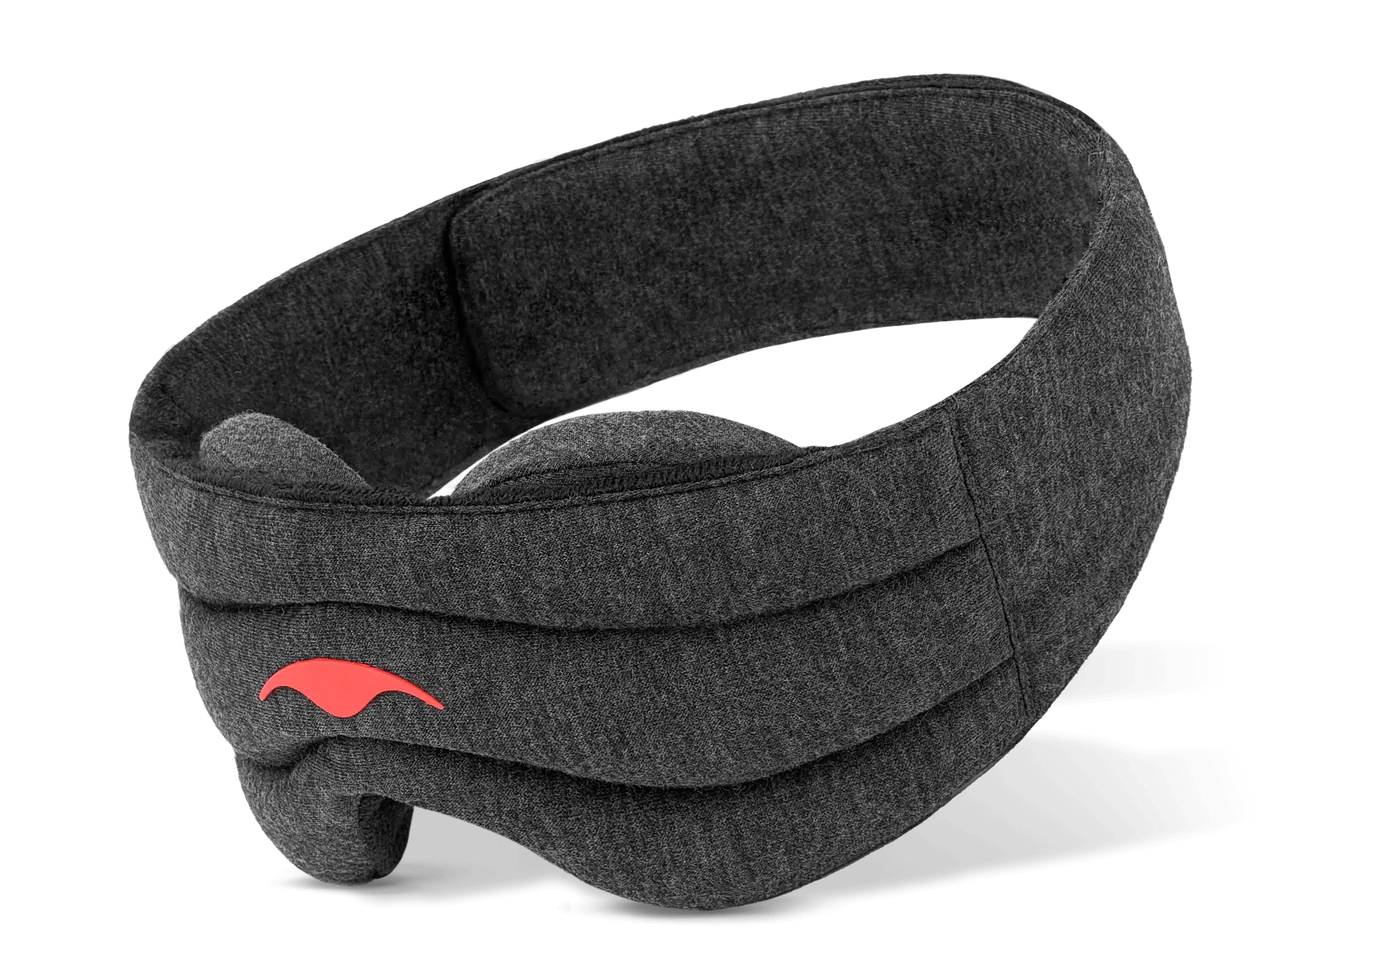 A dark gray weighted sleep mask with adjustable eye covers.